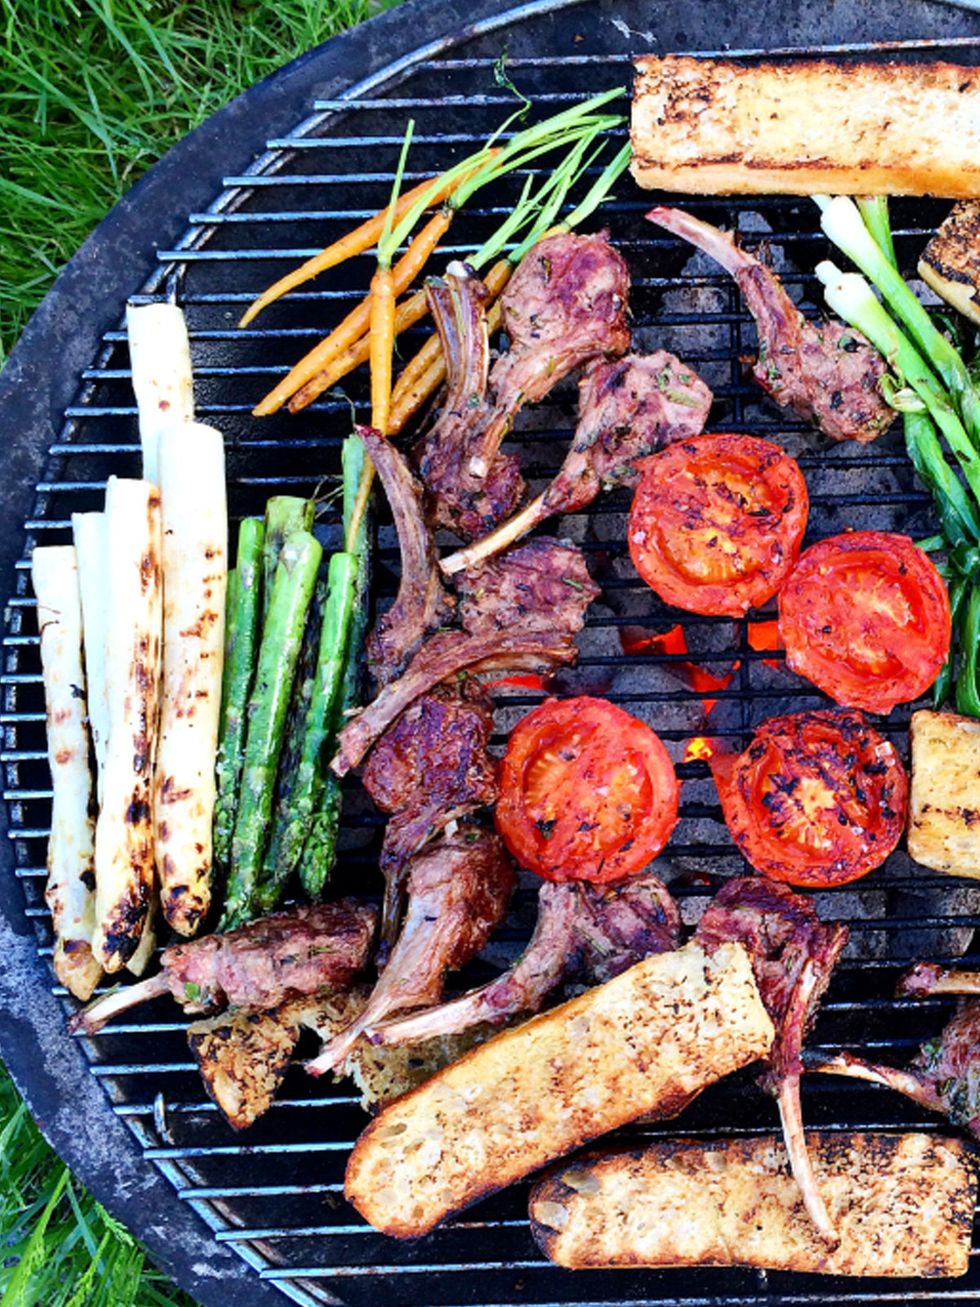 Barbecue, Food, Cuisine, Grilling, Dish, Barbecue grill, Grillades, Outdoor grill, Mixed grill, Ingredient, 